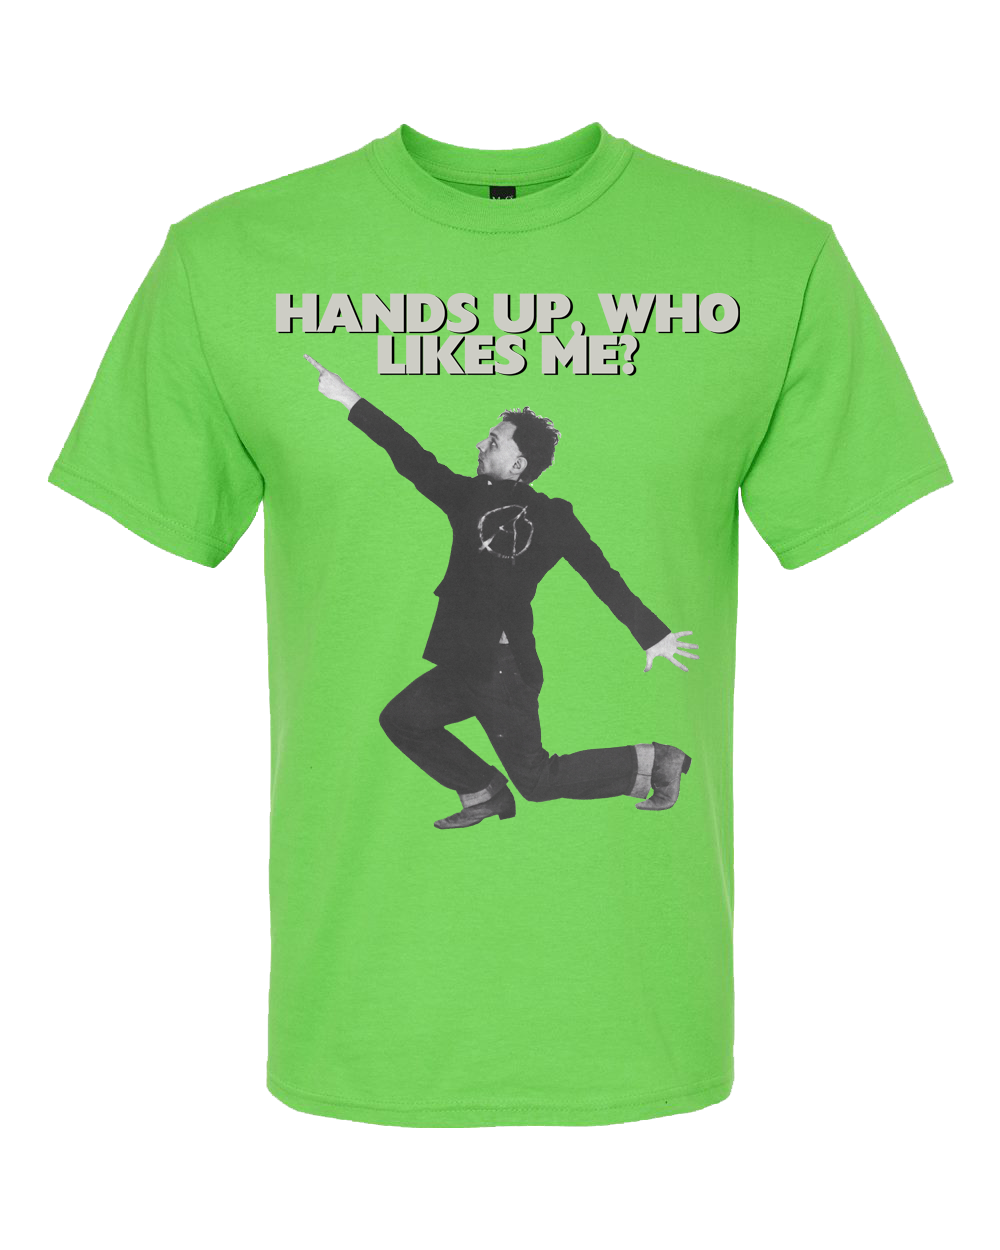 THE YOUNG ONES - RIK: "HANDS UP WHO LIKES ME?" T-SHIRT